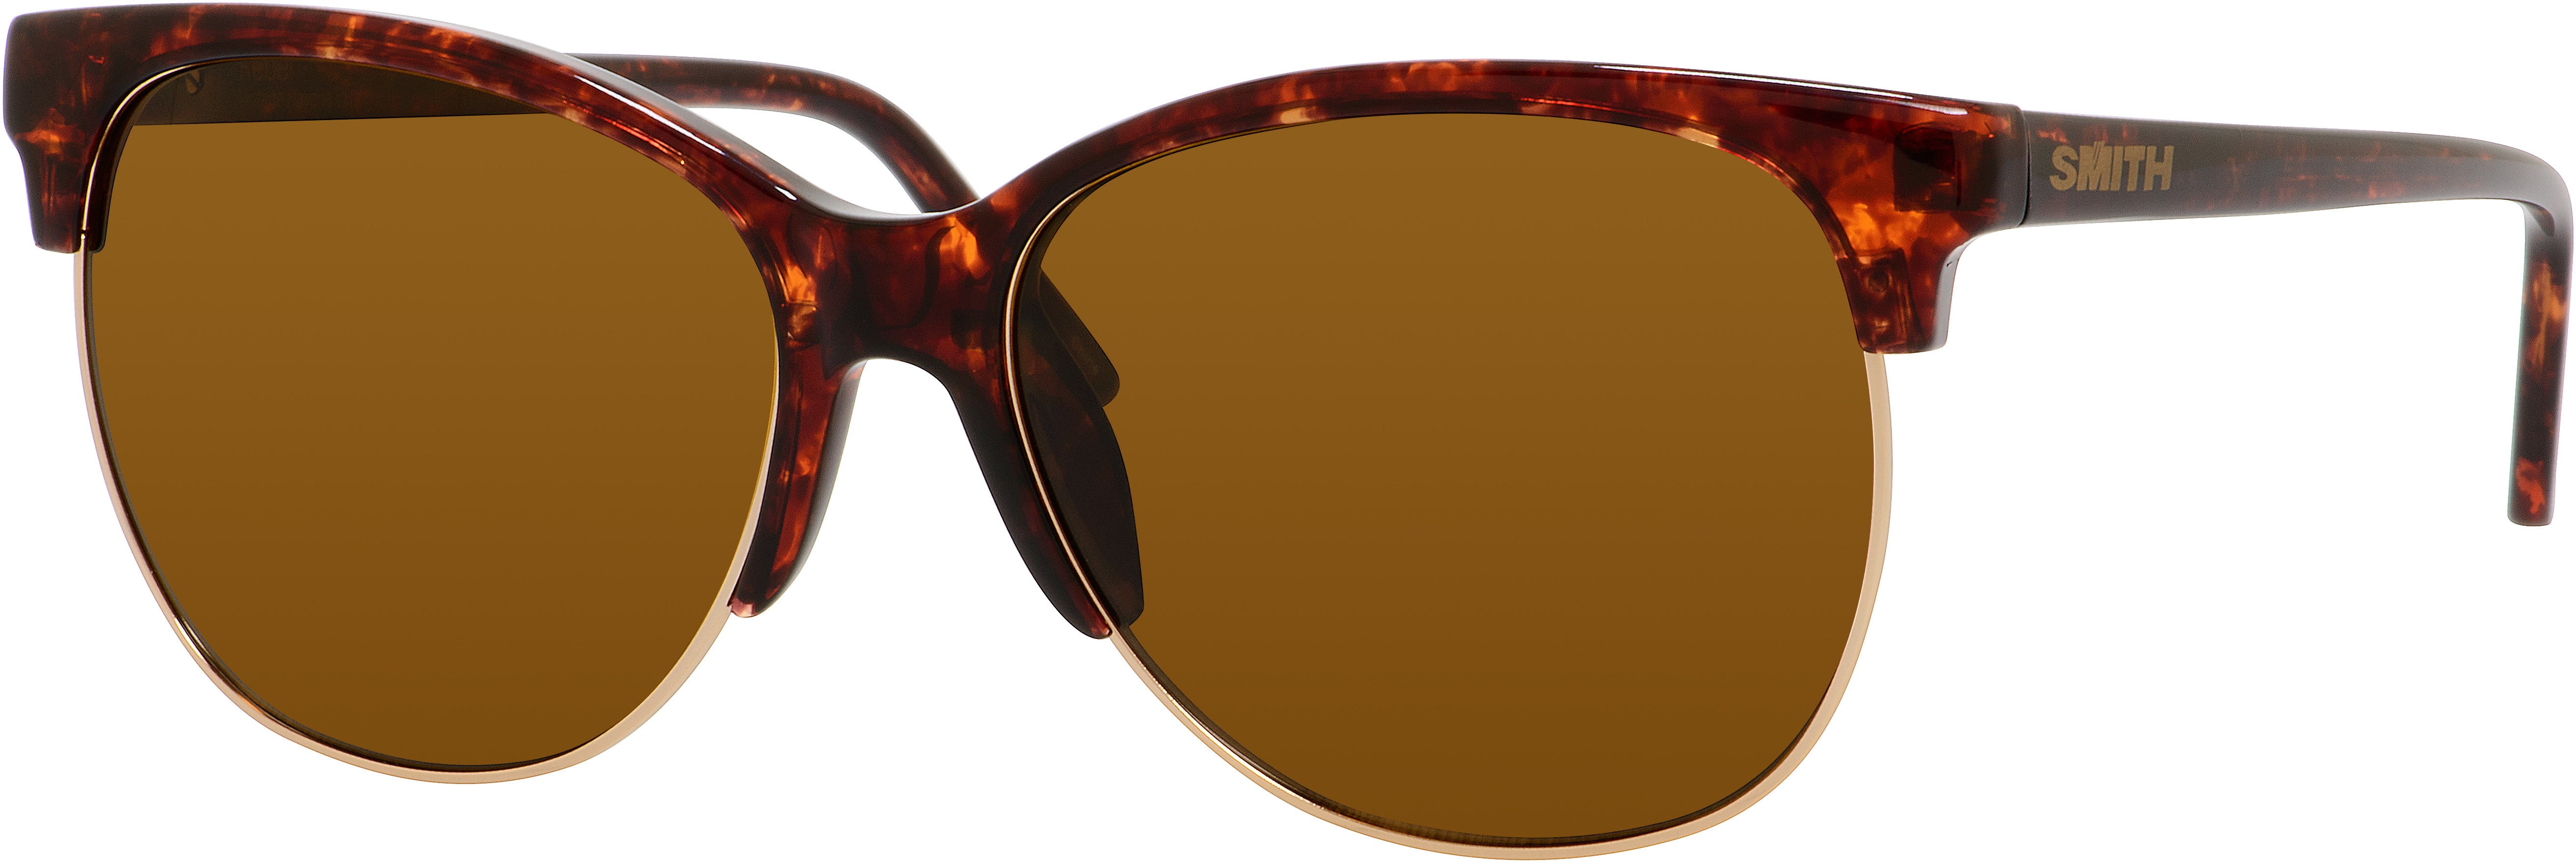 Smith Rebel Oval Modified Sunglasses 0FWH-0FWH  Vintage Havana (F1 Brown Polarized)